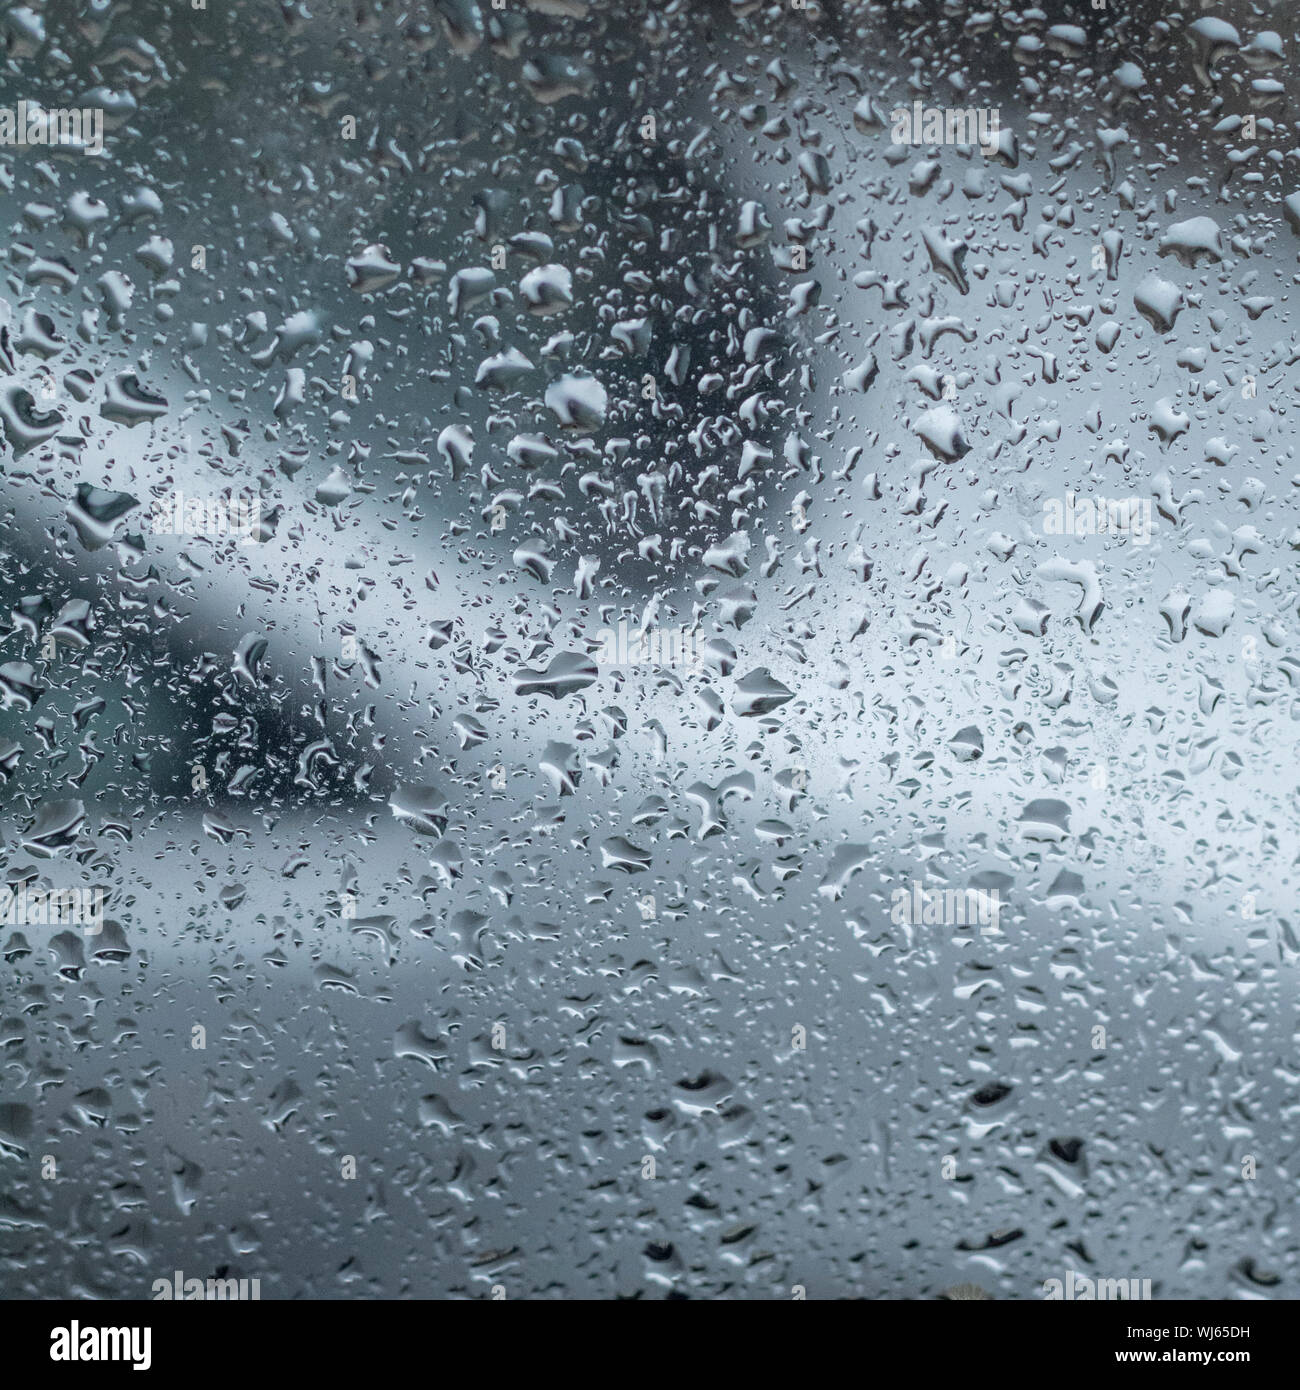 Raindrops on window glass with out of focus car in the background. Rain drops abstract, abstract water drops. Glass with water drops on it. Stock Photo